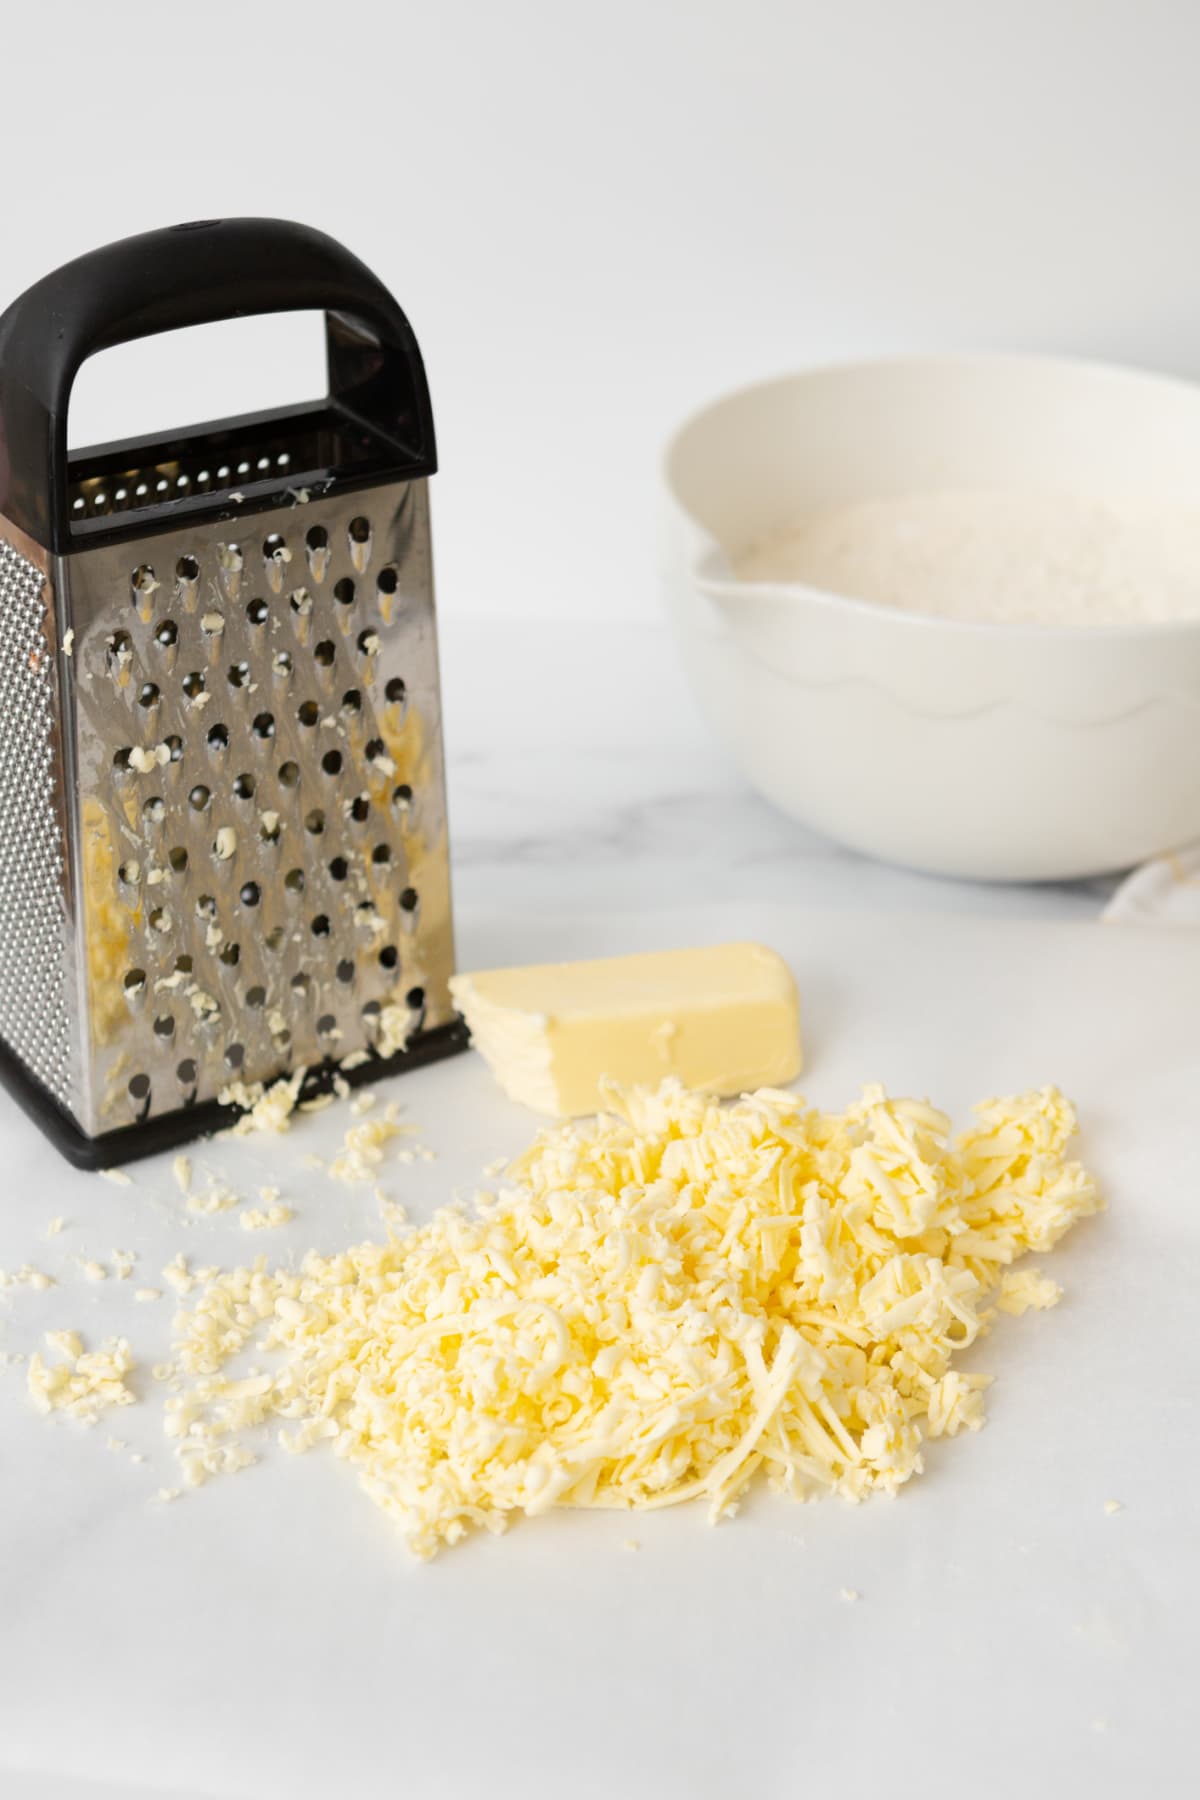 Use a cheese grater on cold butter